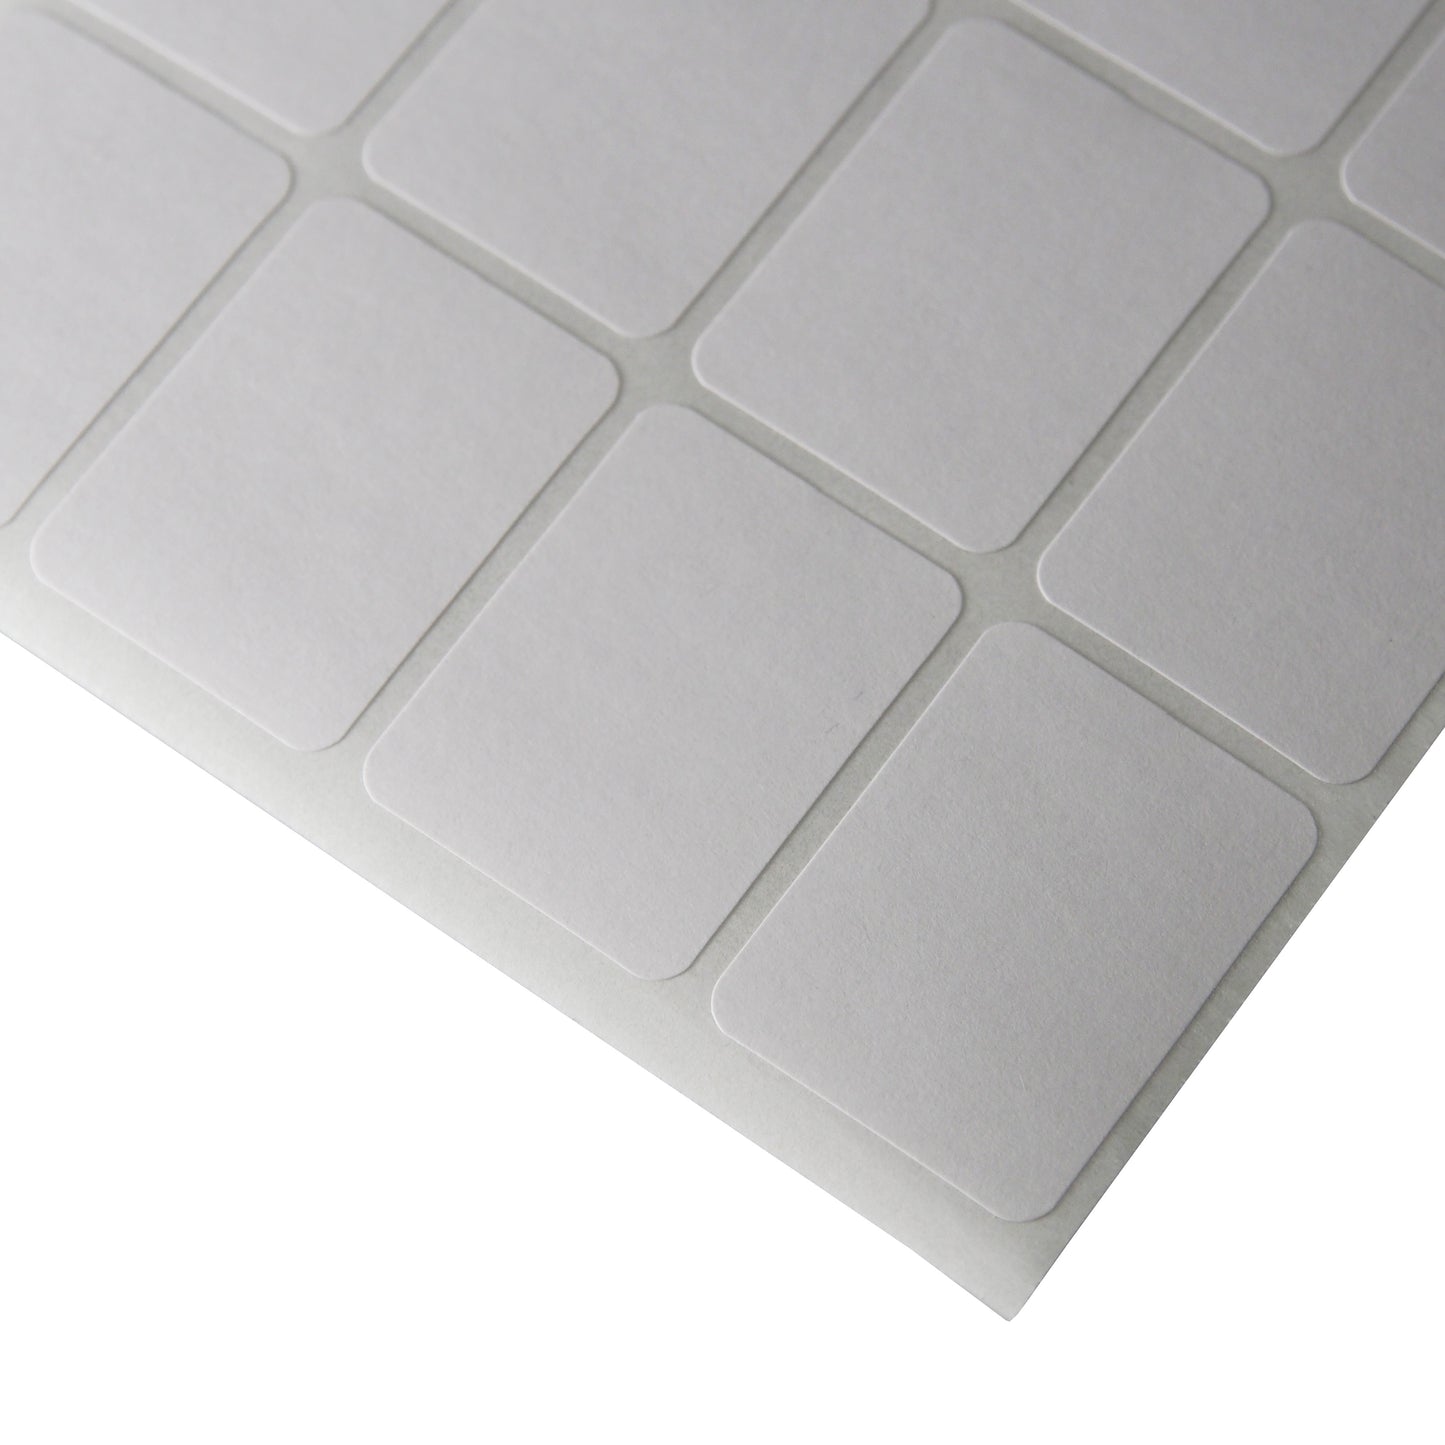 Corner of a sheet of Rounded Edge Rectangular Self Adhesive Plain Labels - 1000 Labels/Pack (3/4" x 1")